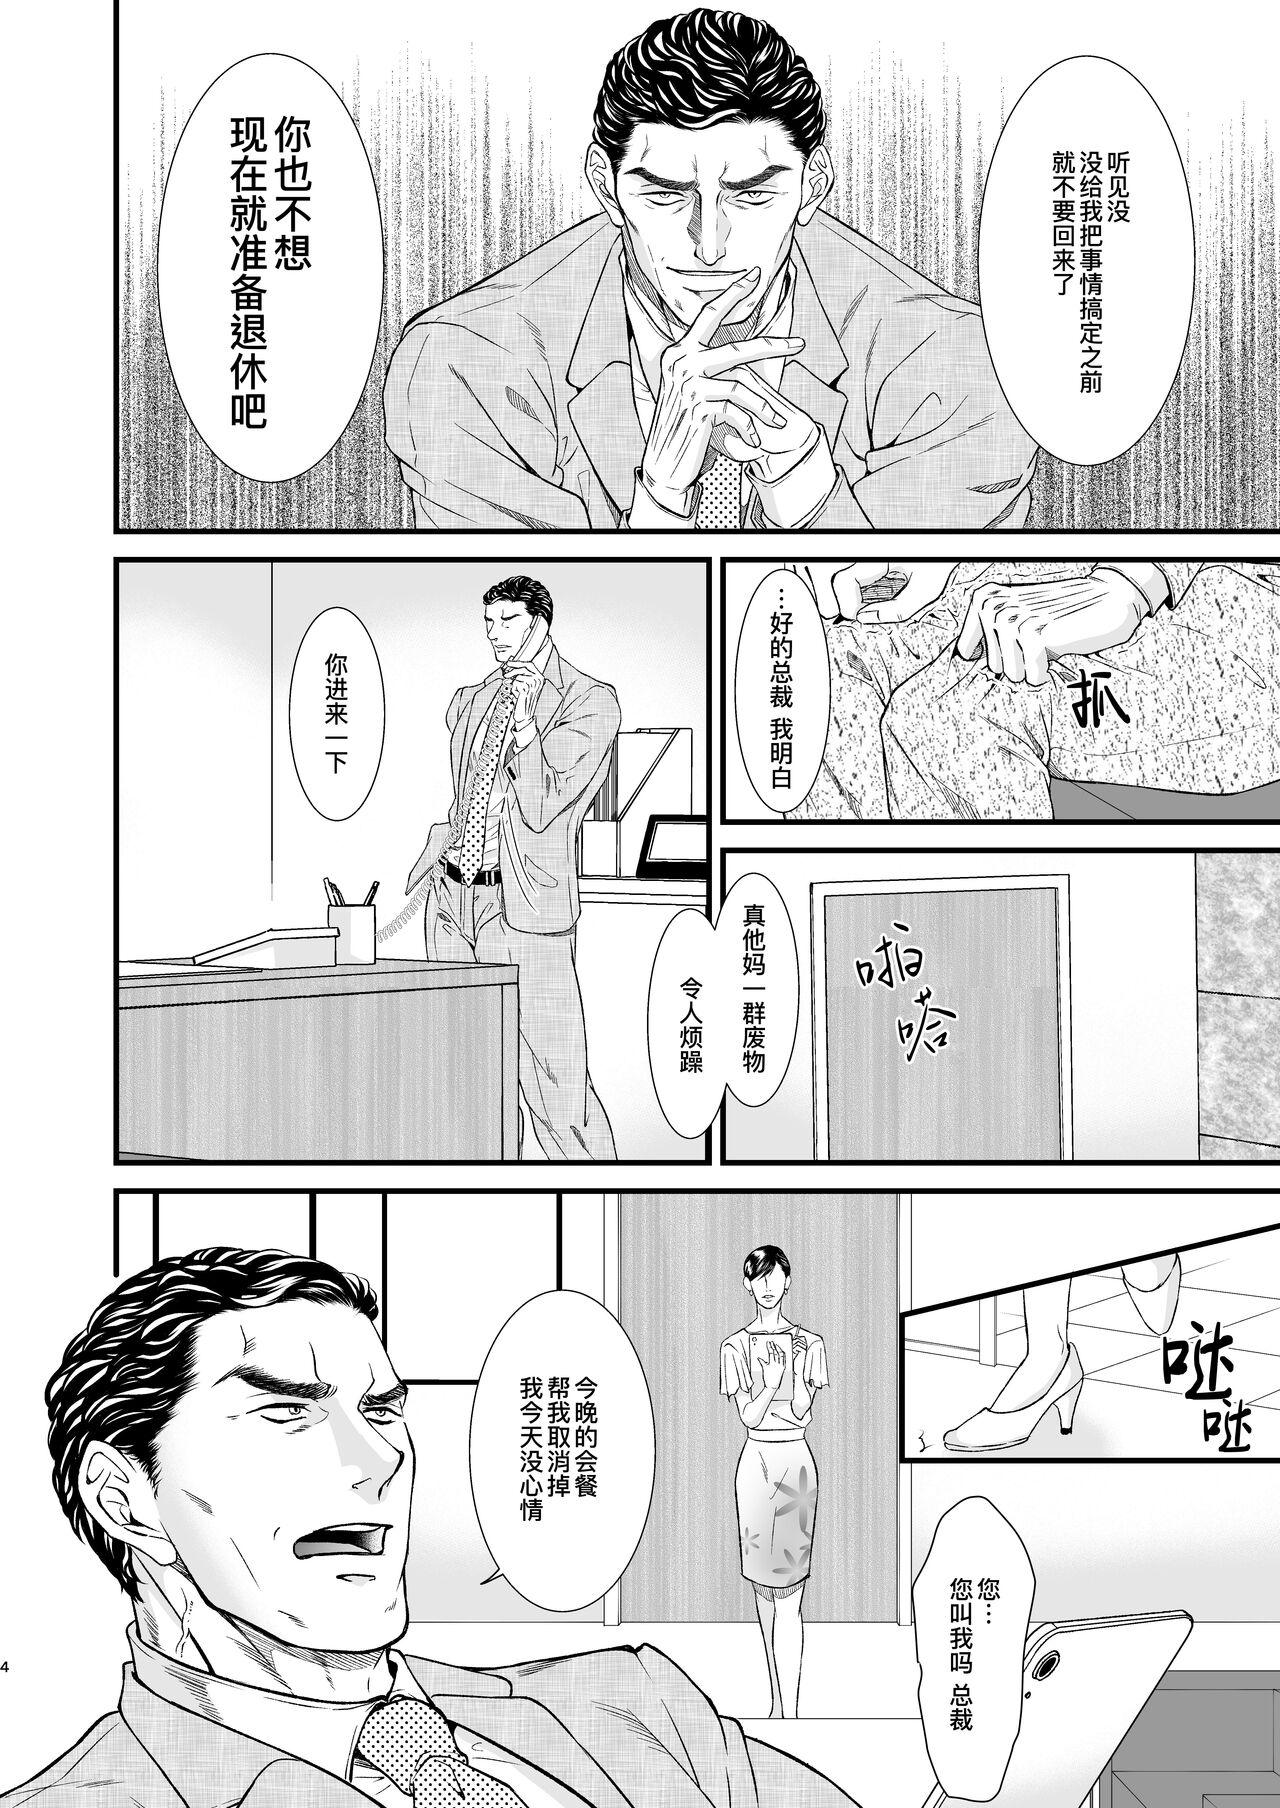 Couch PUNISHMENT 1# | 惩罚霸道总裁-第1卷 - Original Naked - Page 4